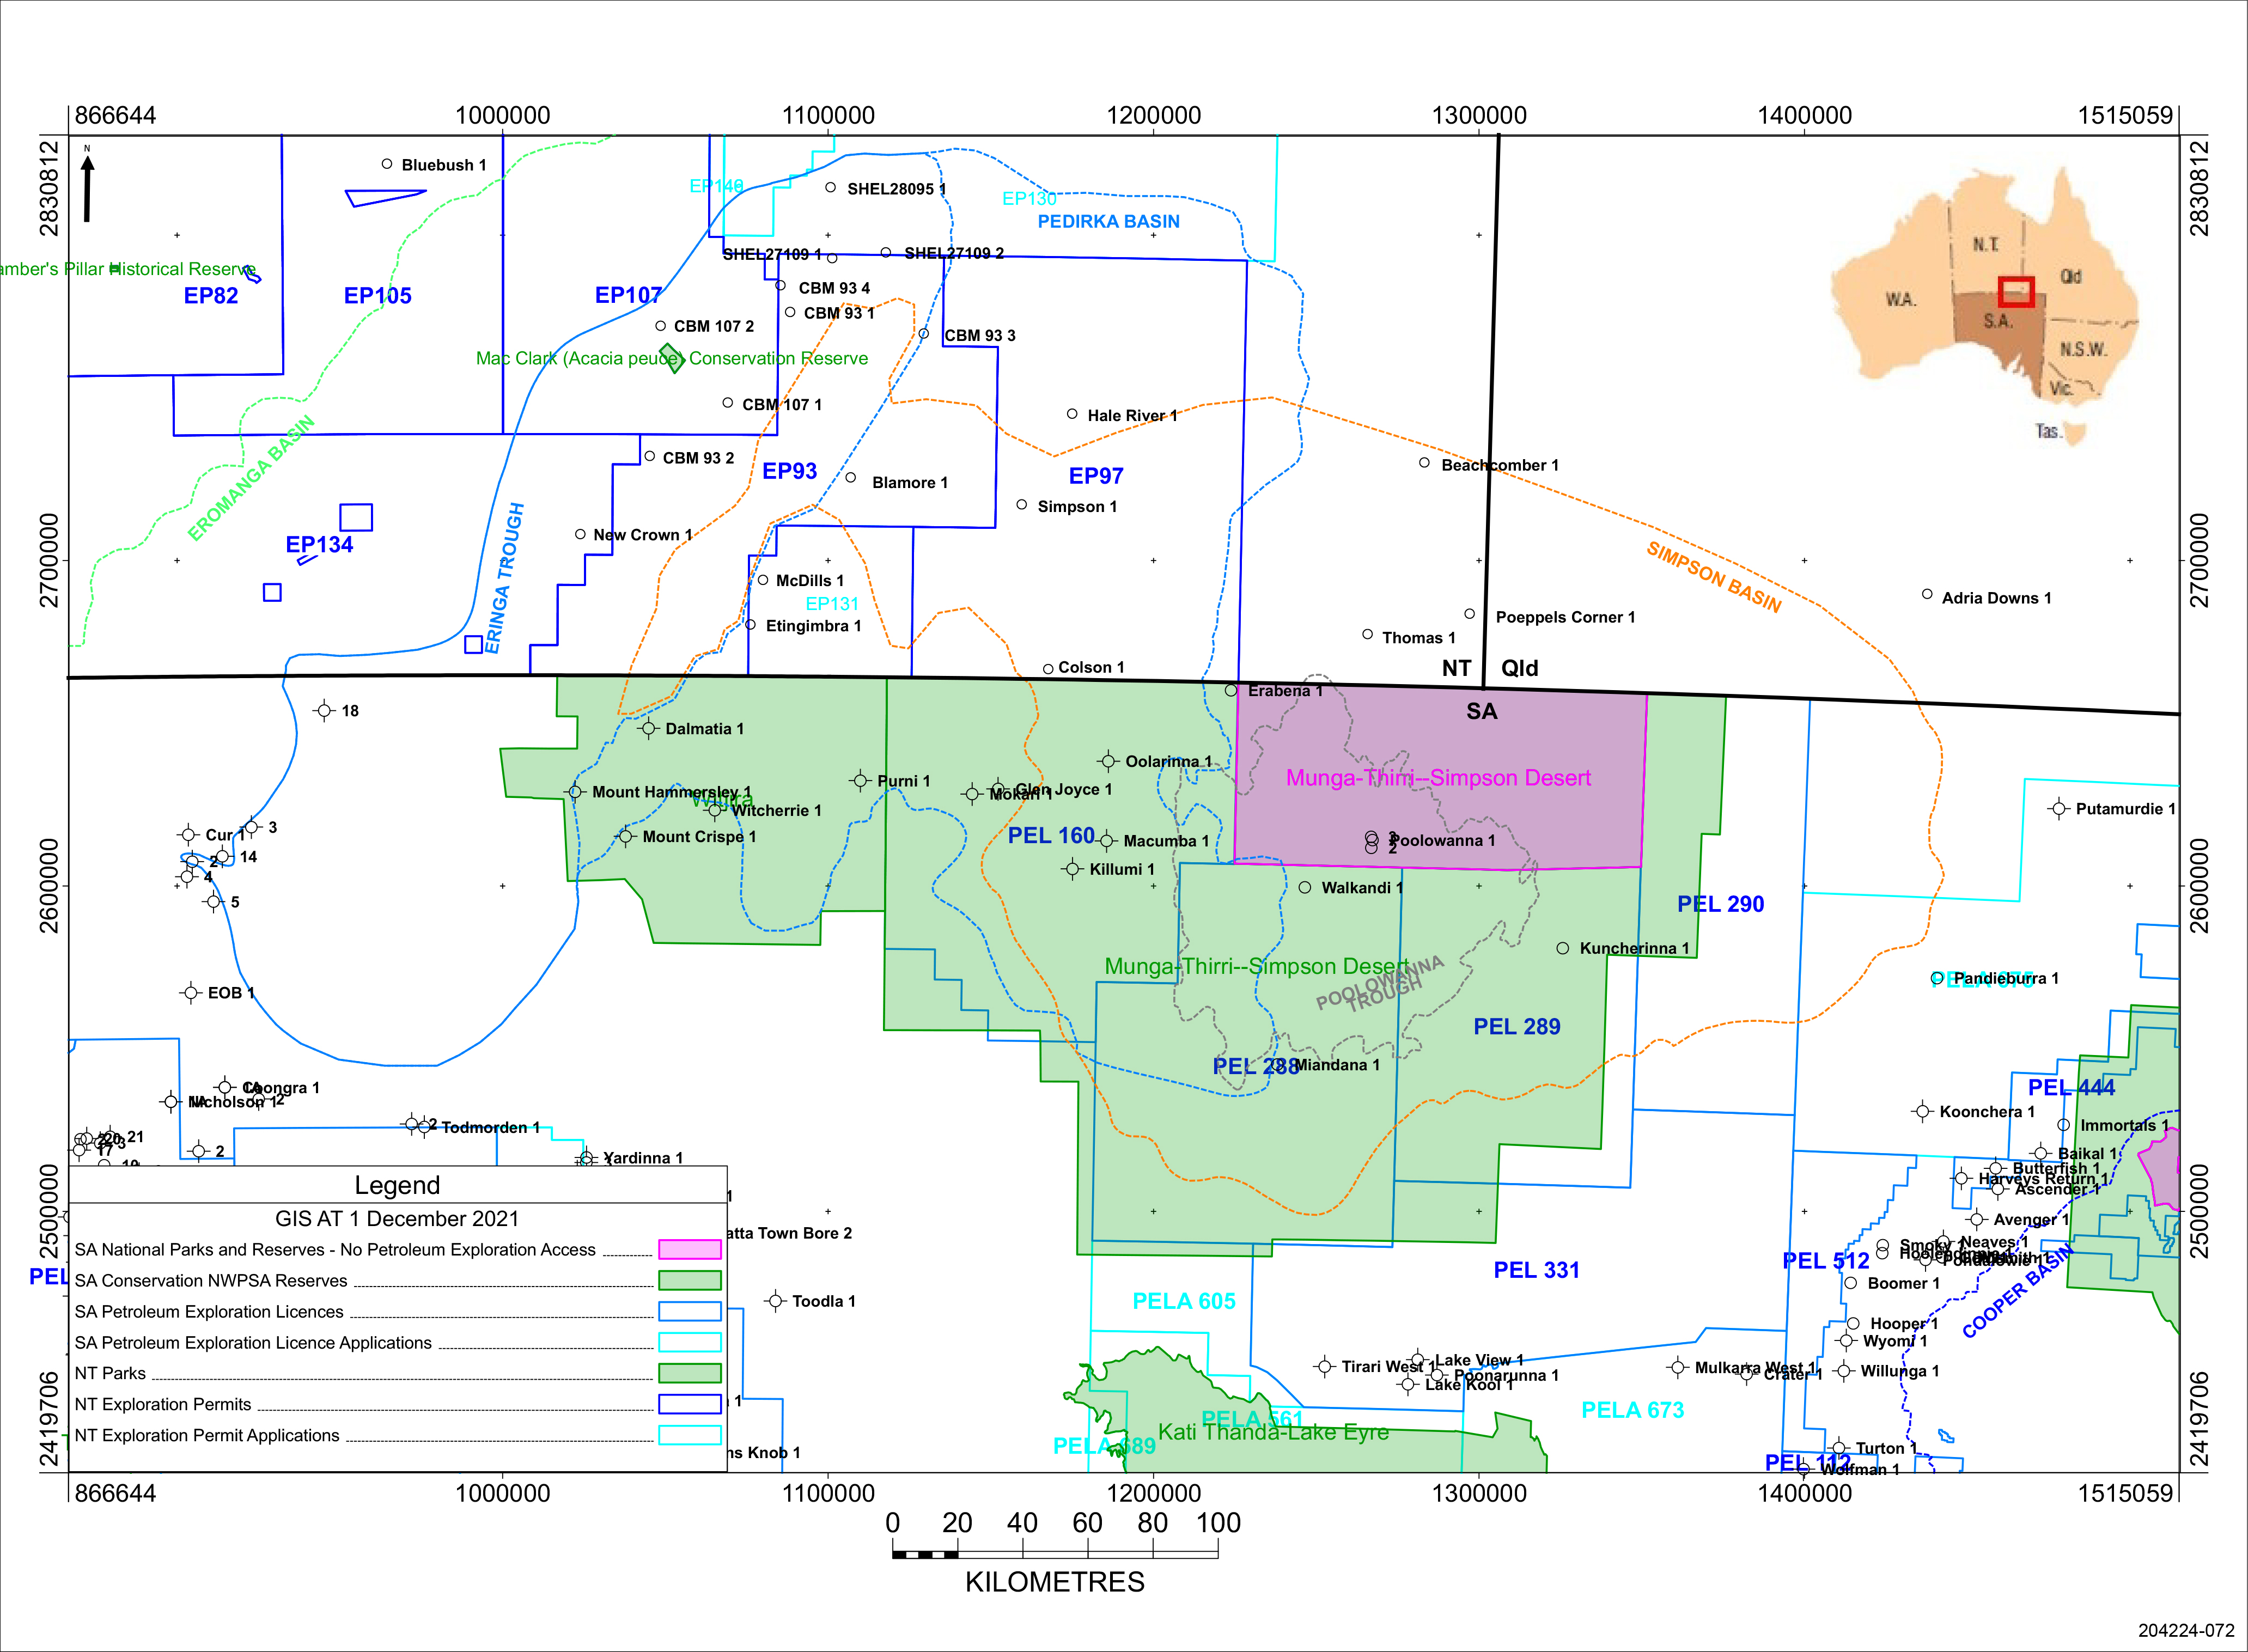 Petroleum exploration permits, regional reserves and conservation parks in the Poolowanna Trough area as at August 2021